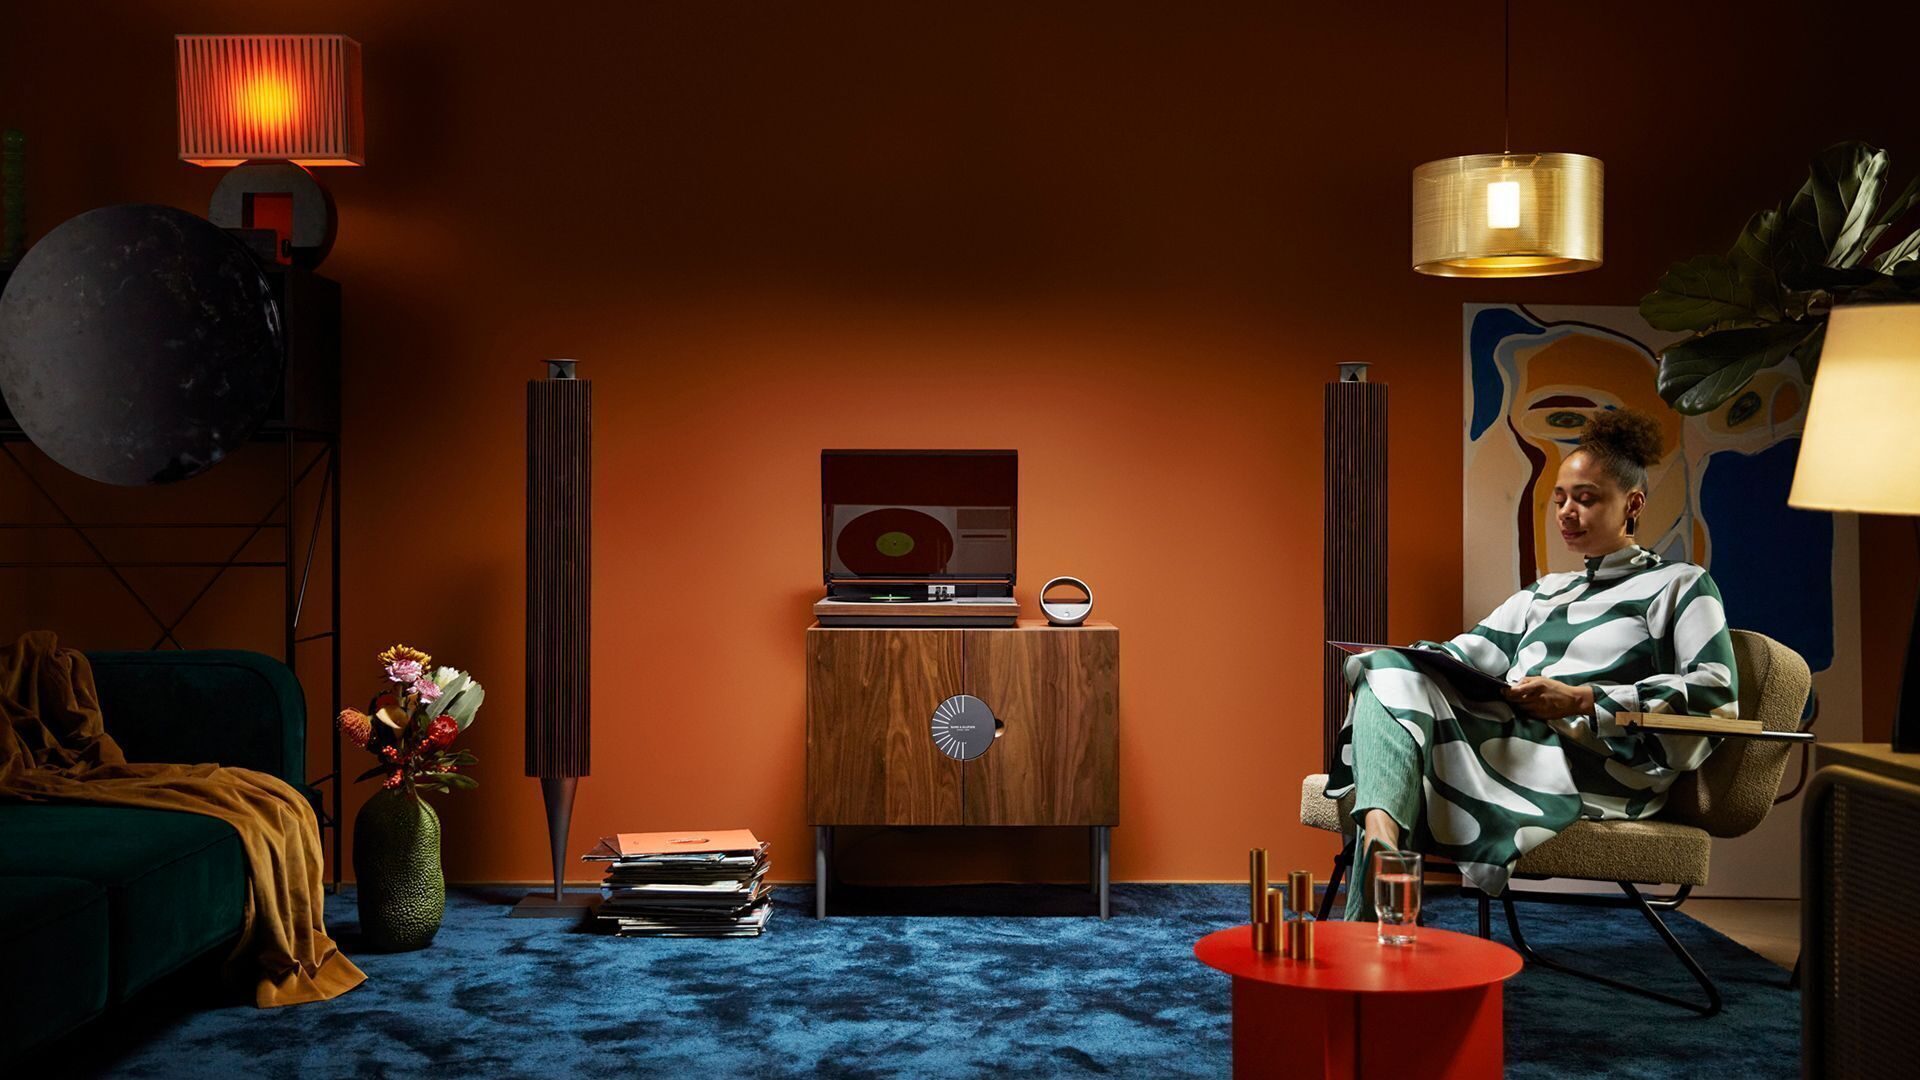 This Limited Edition Turntable Is A Statement Piece For Your Living Room